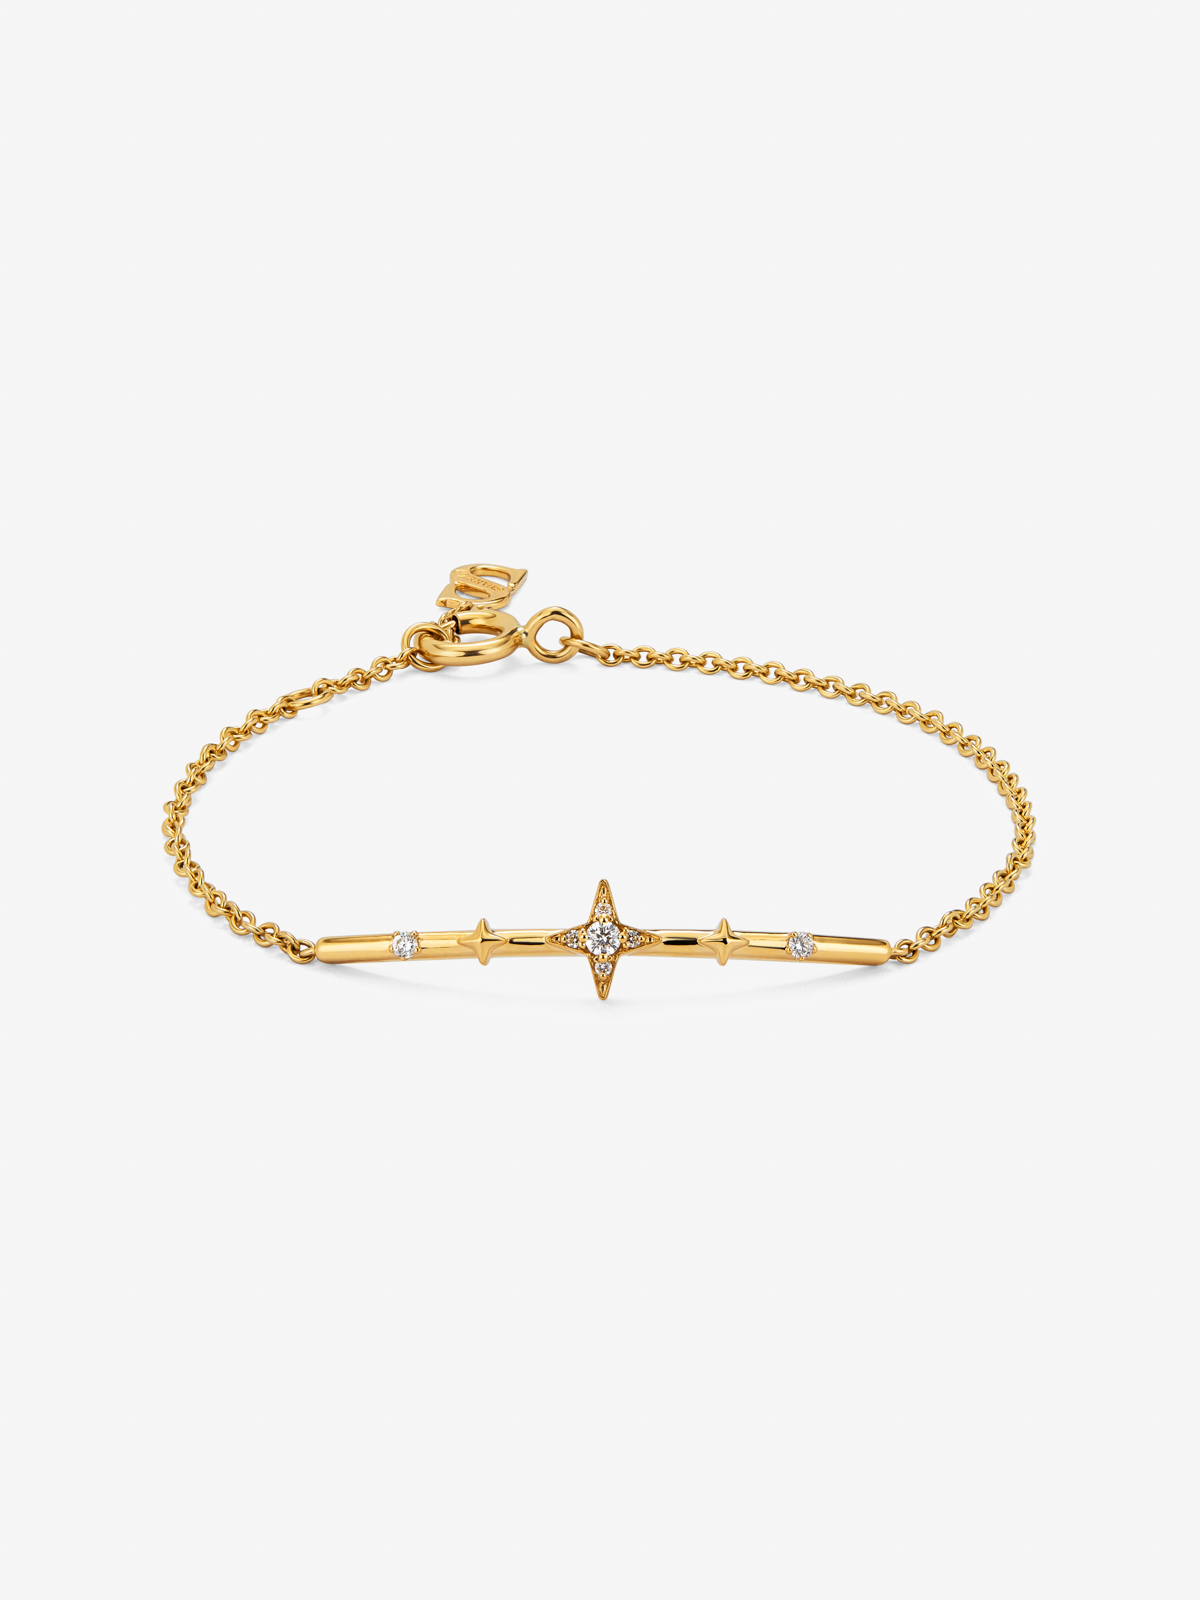 18K yellow gold bracelet with 7 brilliant-cut diamonds with a total of 0.08 cts